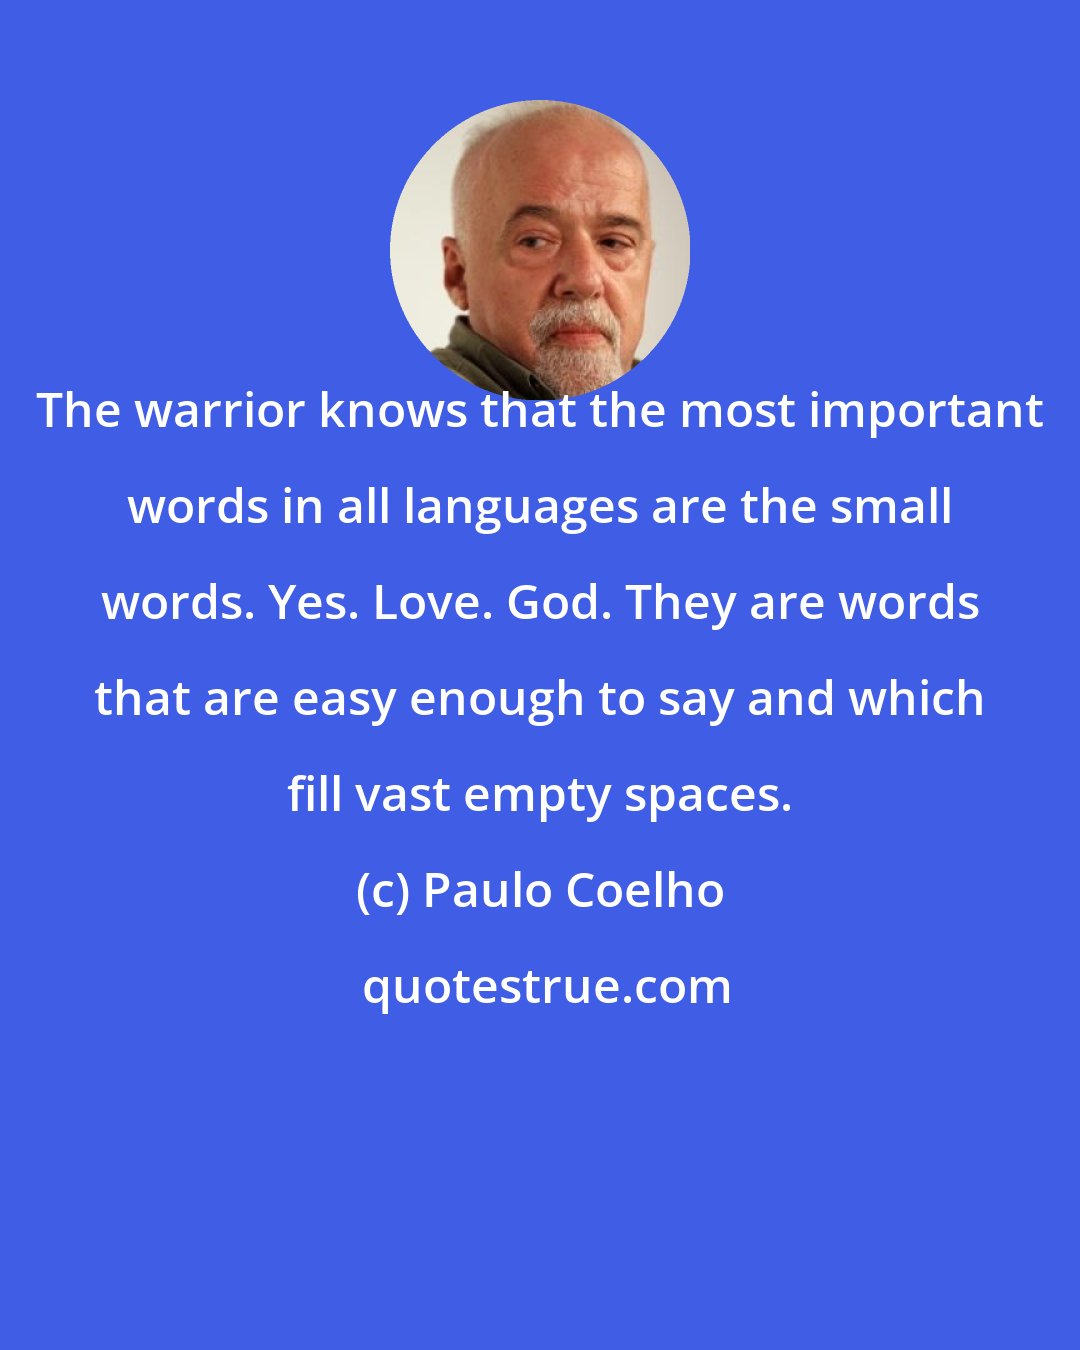 Paulo Coelho: The warrior knows that the most important words in all languages are the small words. Yes. Love. God. They are words that are easy enough to say and which fill vast empty spaces.